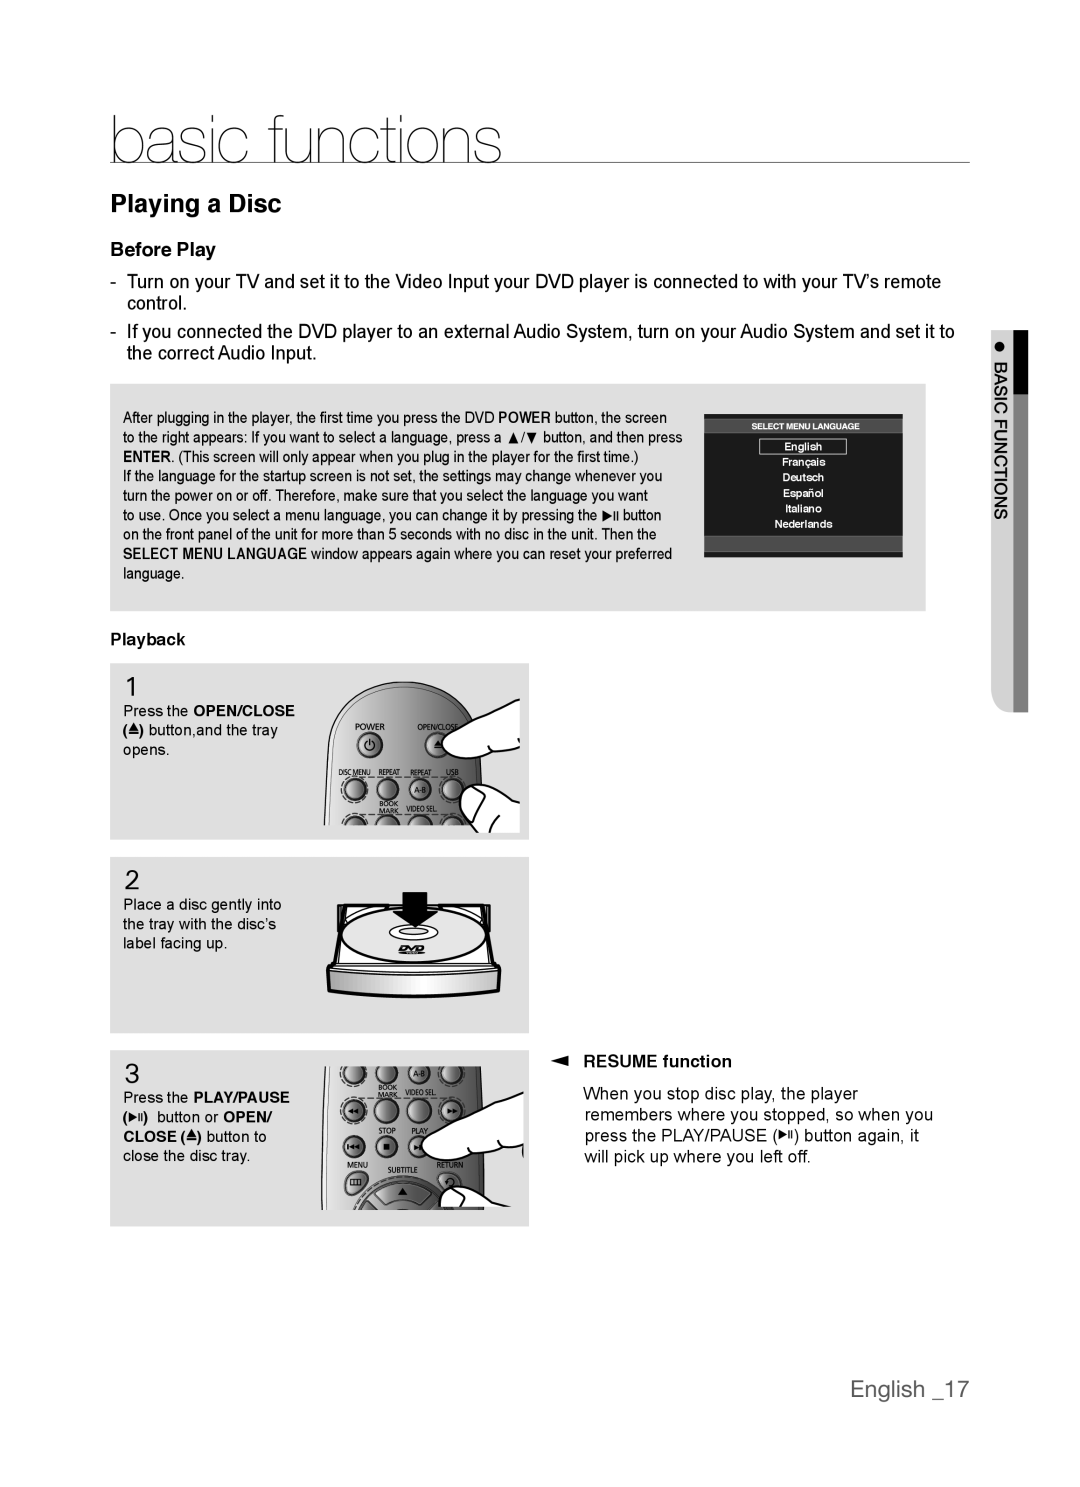 Samsung AK68-01770G, DVD-P390 user manual Playing a Disc, Before Play, basic functions, English 